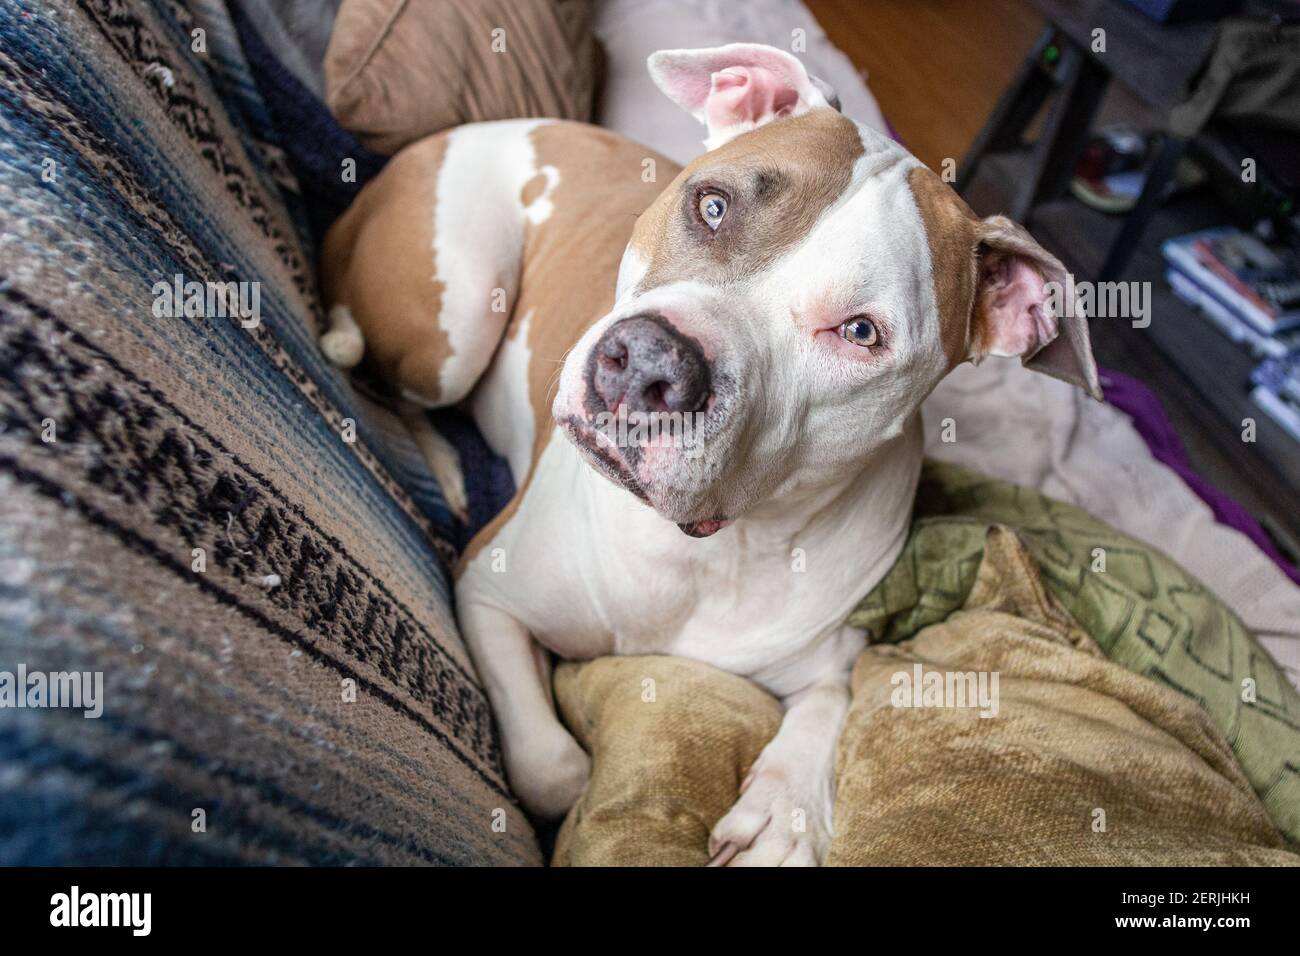 A mixed breed pitbull dog (American Staffordshire Pit Bull Terrier and American Pit Bull Terrier) (Canis lupus familiaris) looks alert on a couch. Stock Photo